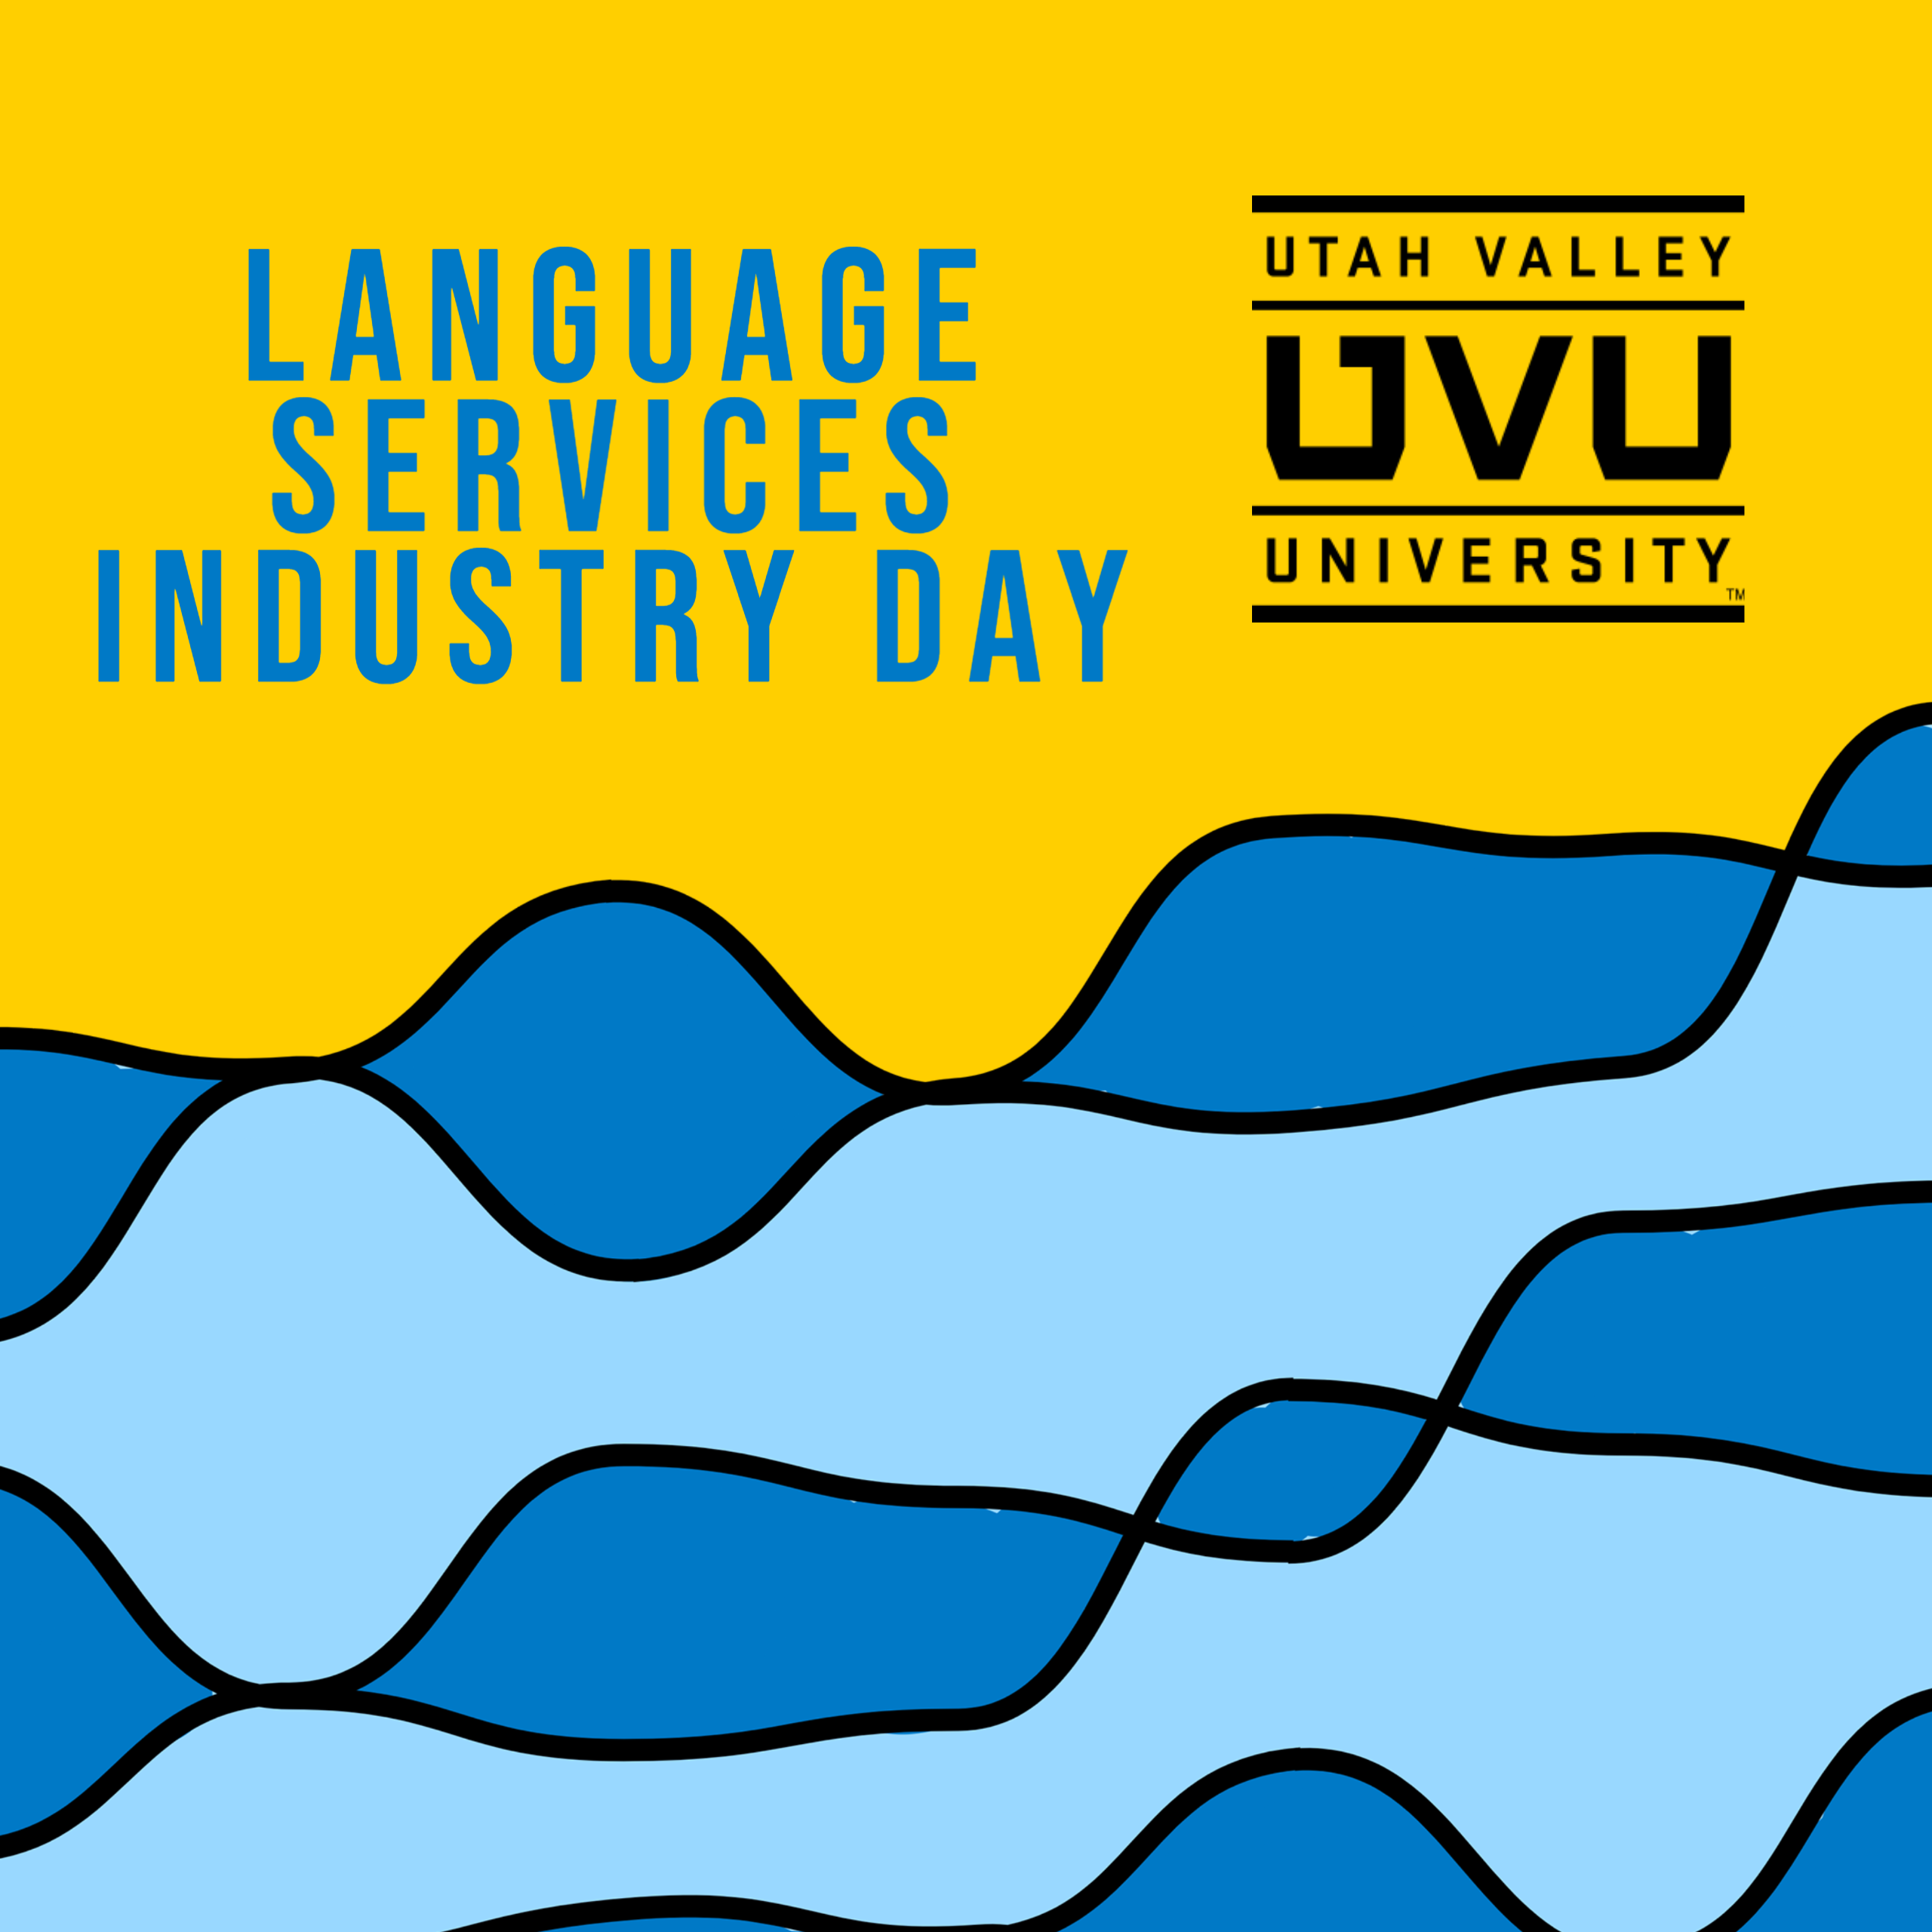 Bright background with words "Language Services Industry Day" and UVU's logo